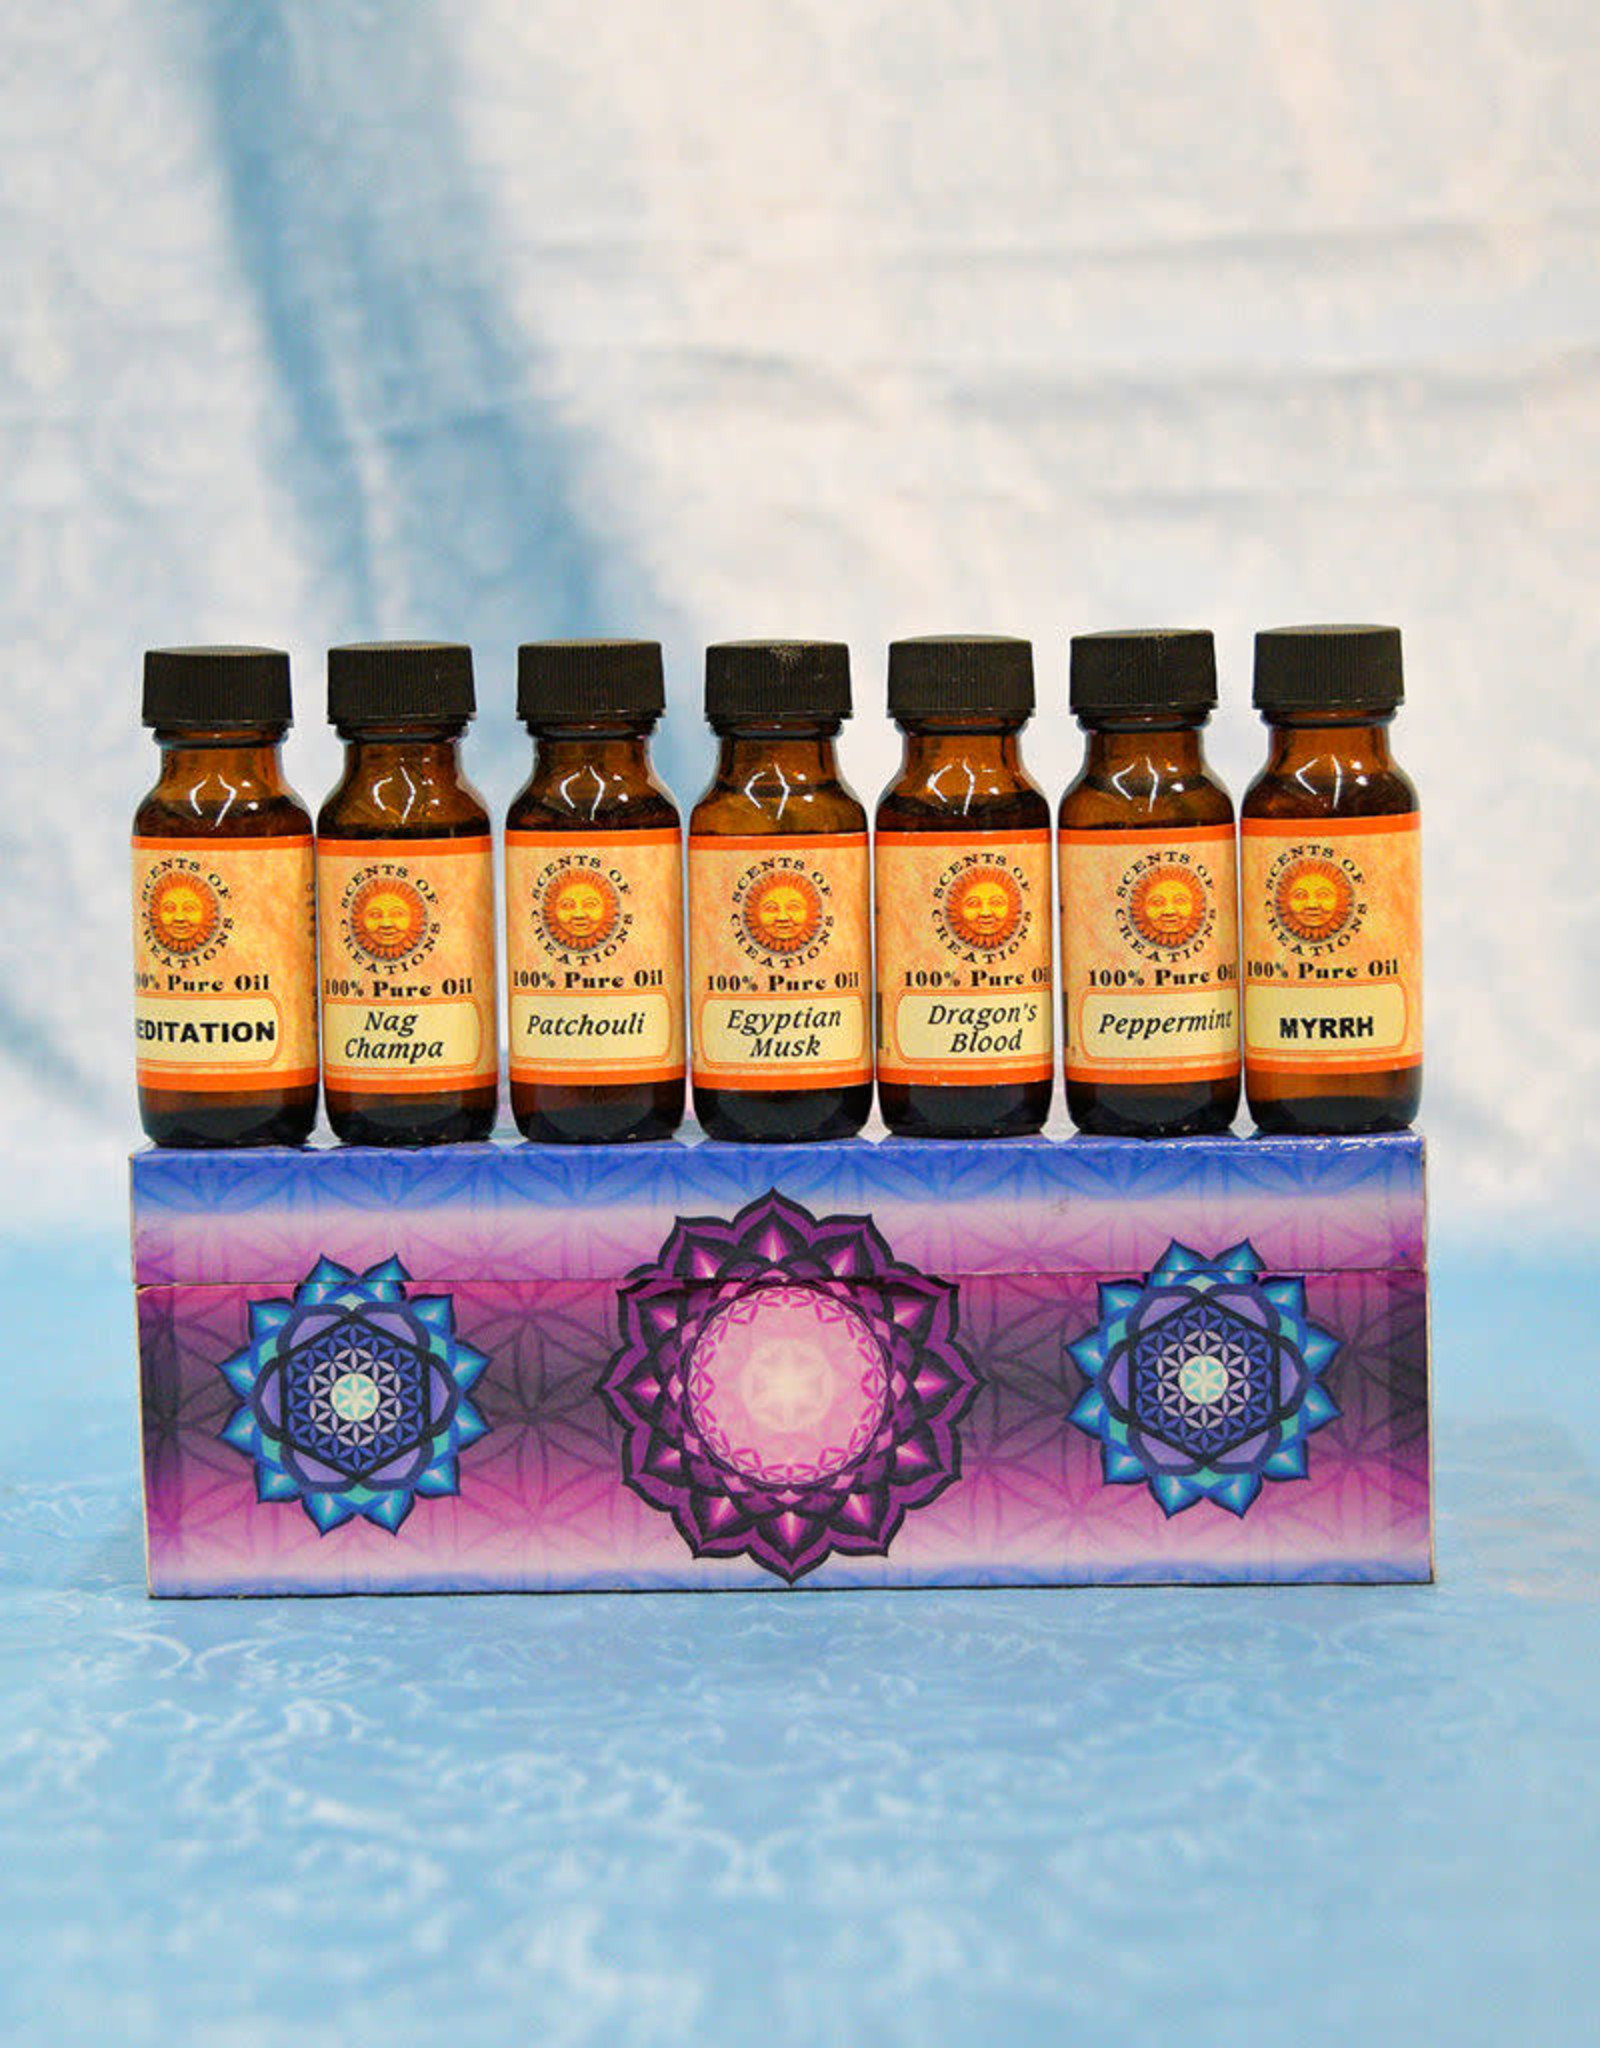 Scents of Creations Scents of Creations Fragrance Oil - Mango